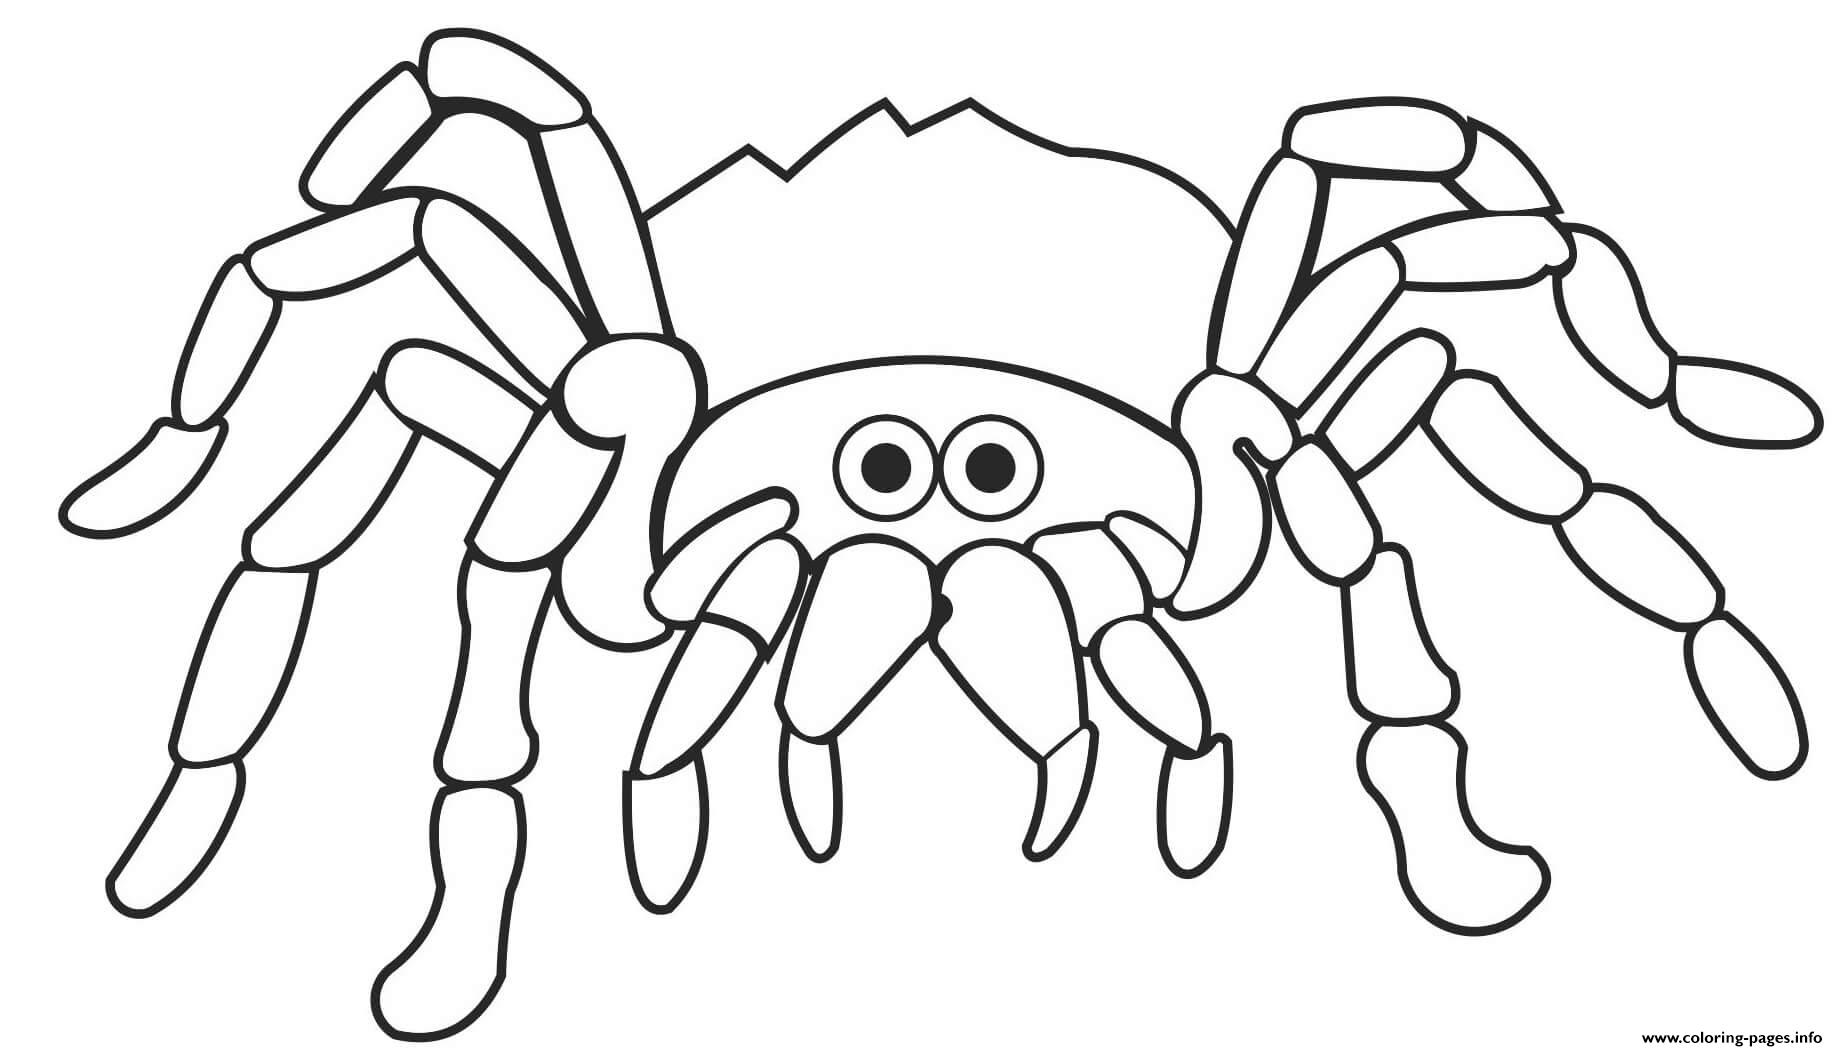 Easy Spider coloring